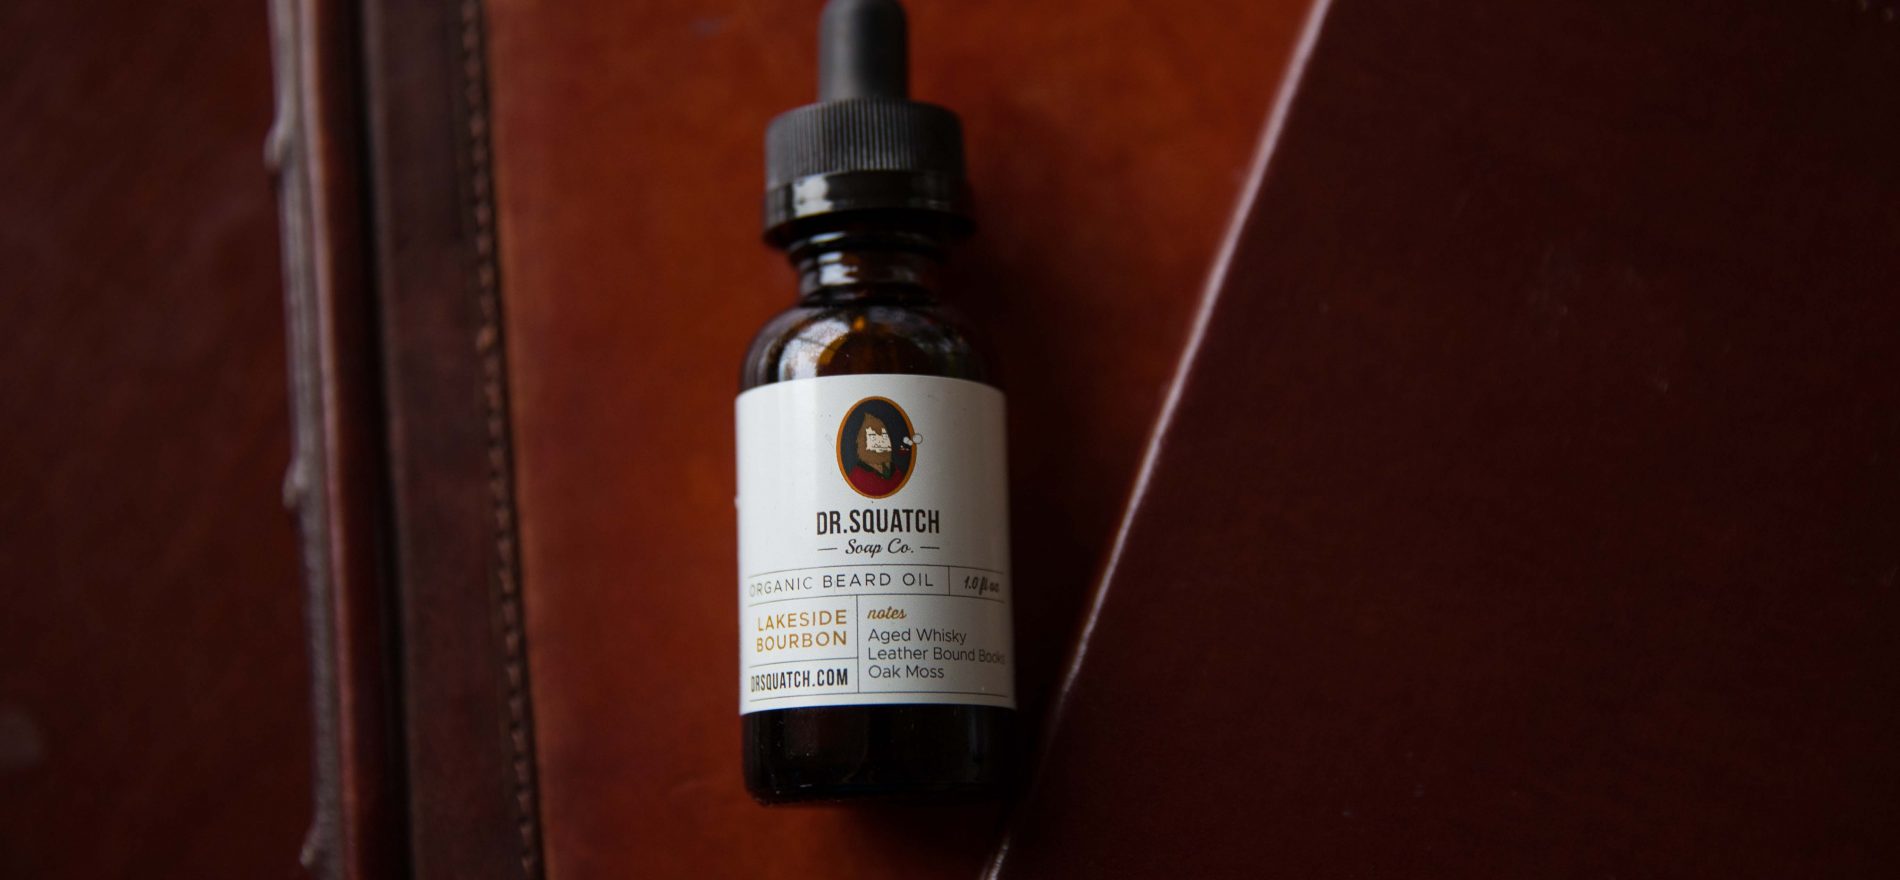 Watch This BEFORE BUYING Dr. Squatch Beard Oil